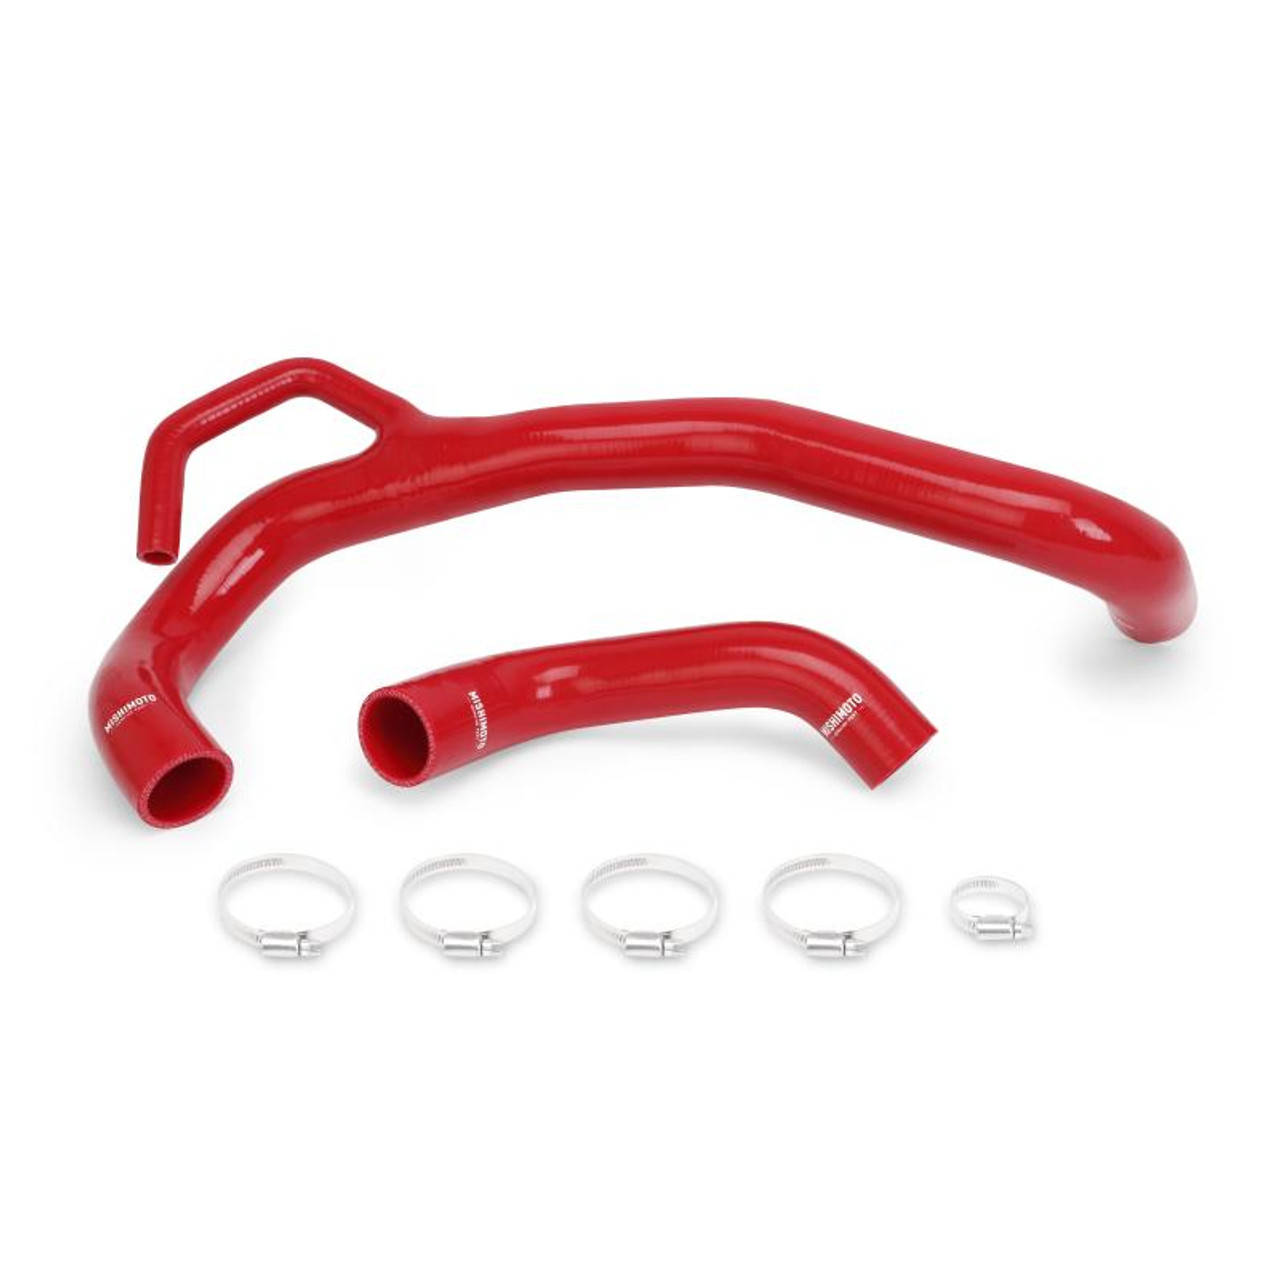 Mishimoto 2011 Mopar LX Chassis 6.4L Hemi Red Silicone Hose Kit - MMHOSE-MOP64-11RD